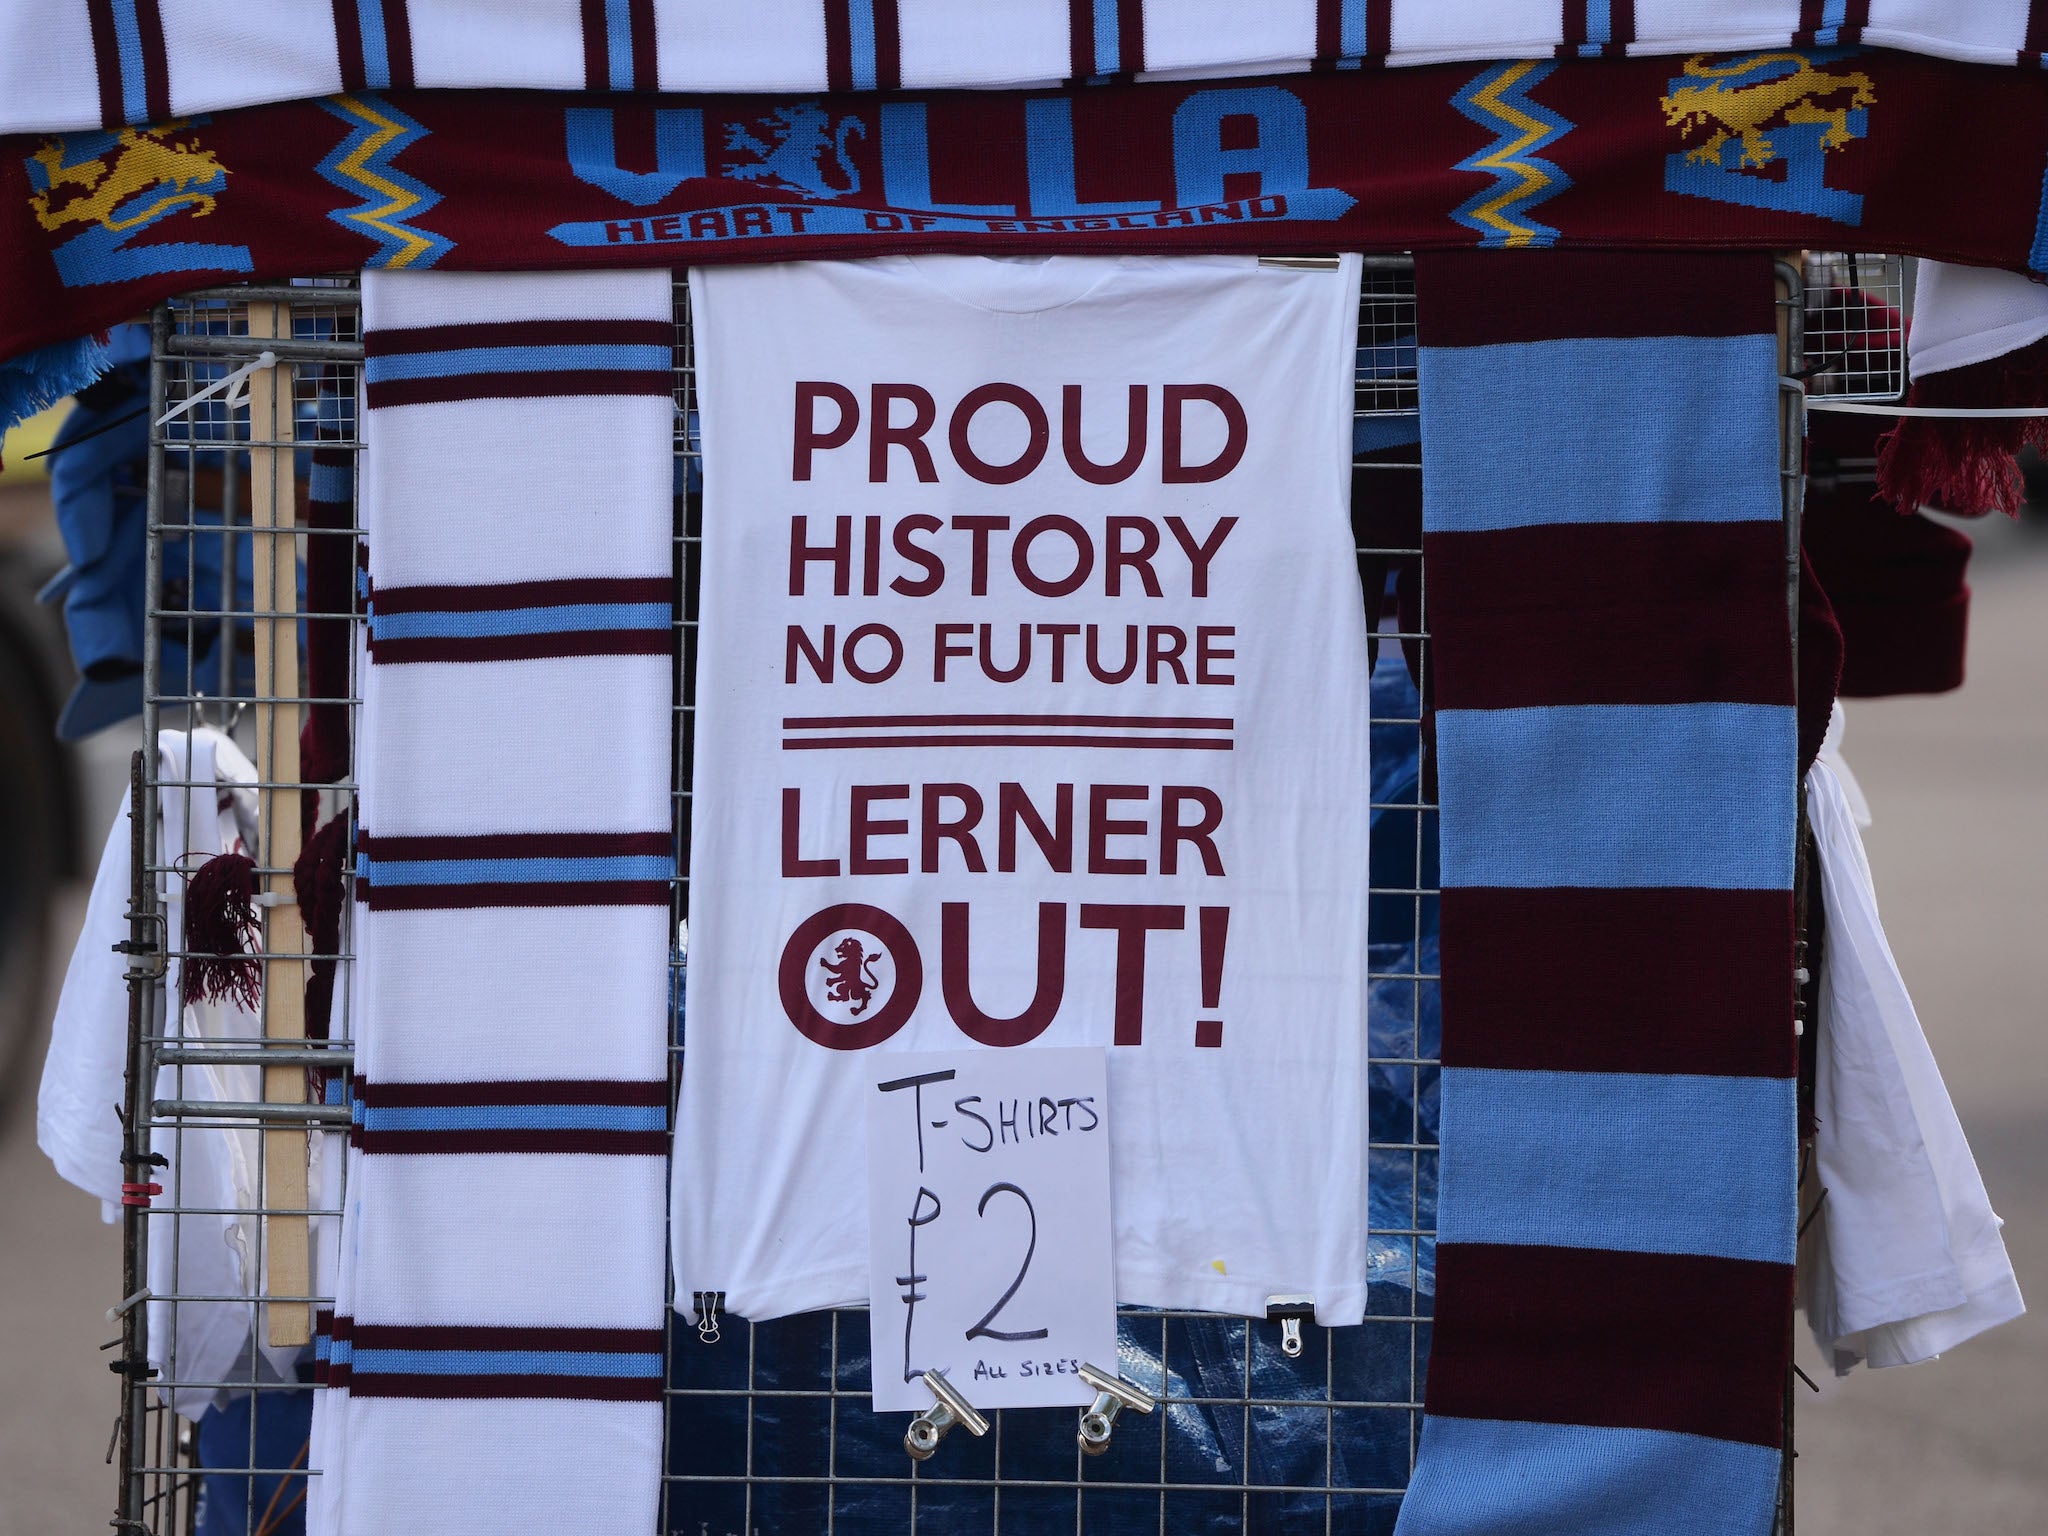 Villa fans succeeded in hounding Randy Lerner out of the club